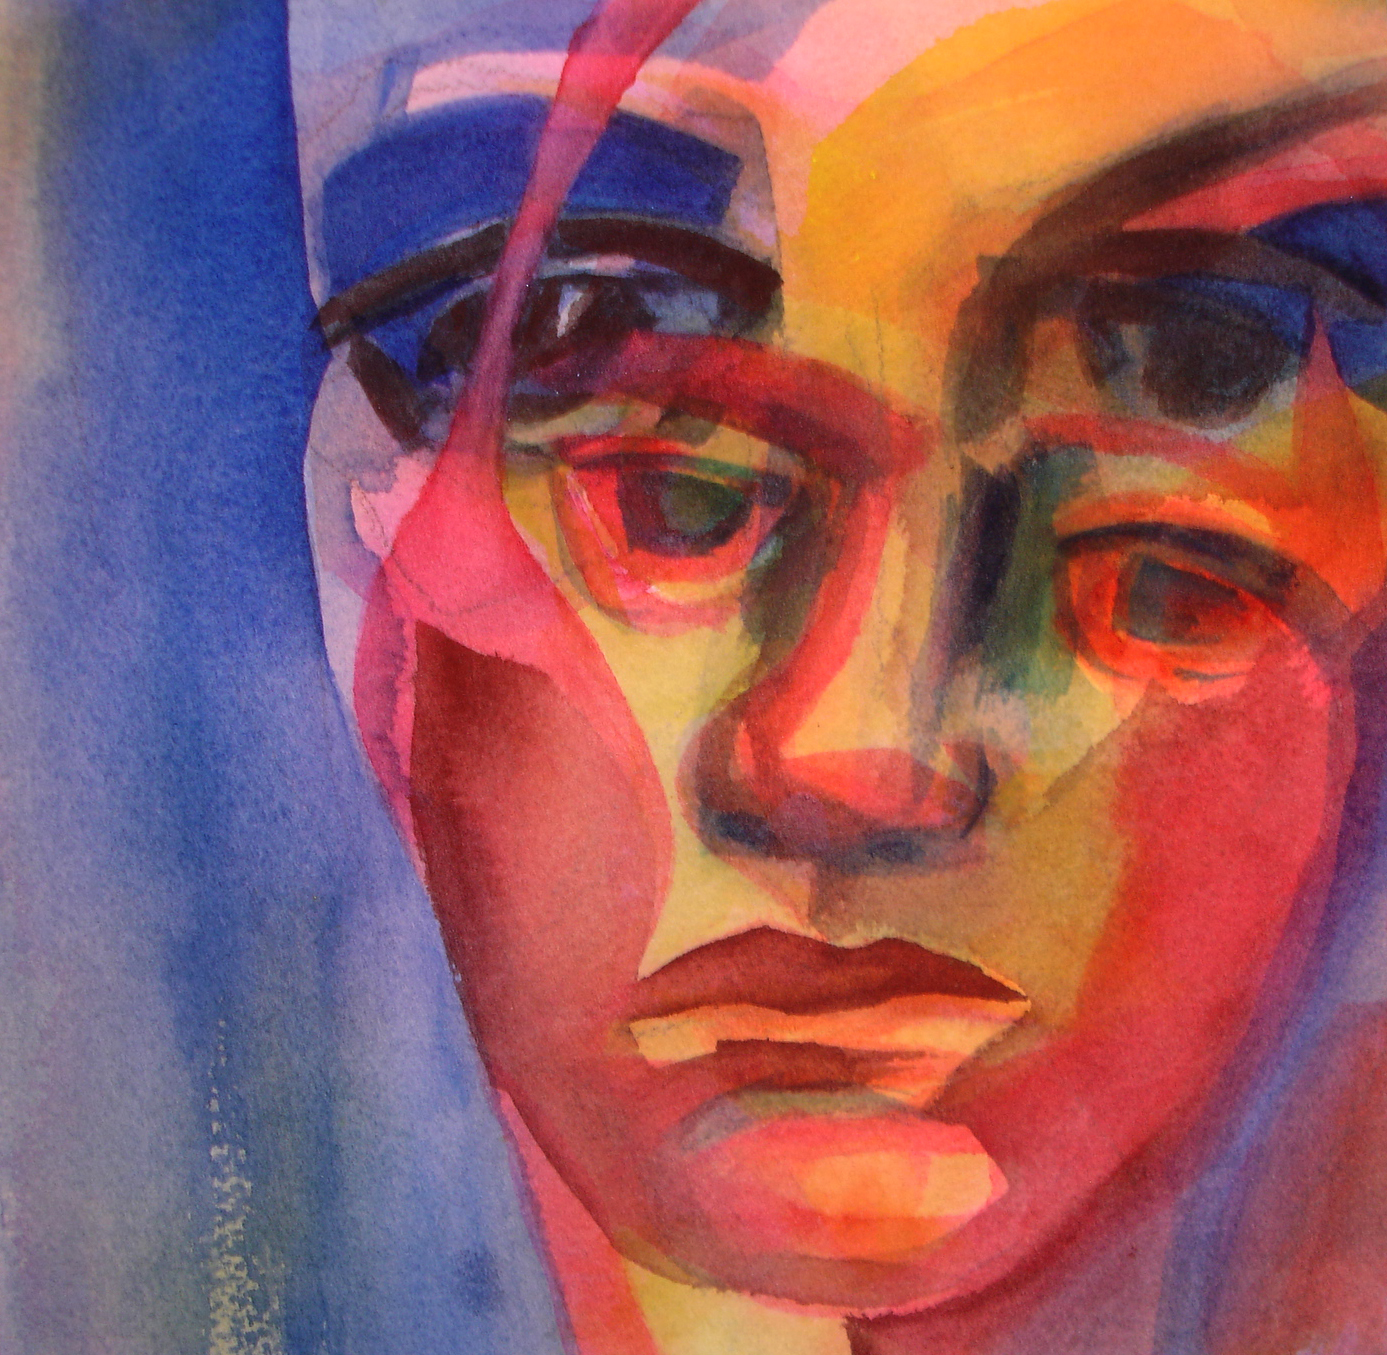 An 8" x 8" watercolor painted in vivid colors, "Ideation" appears to be a double exposure of the face of a woman alone with her thoughts. 